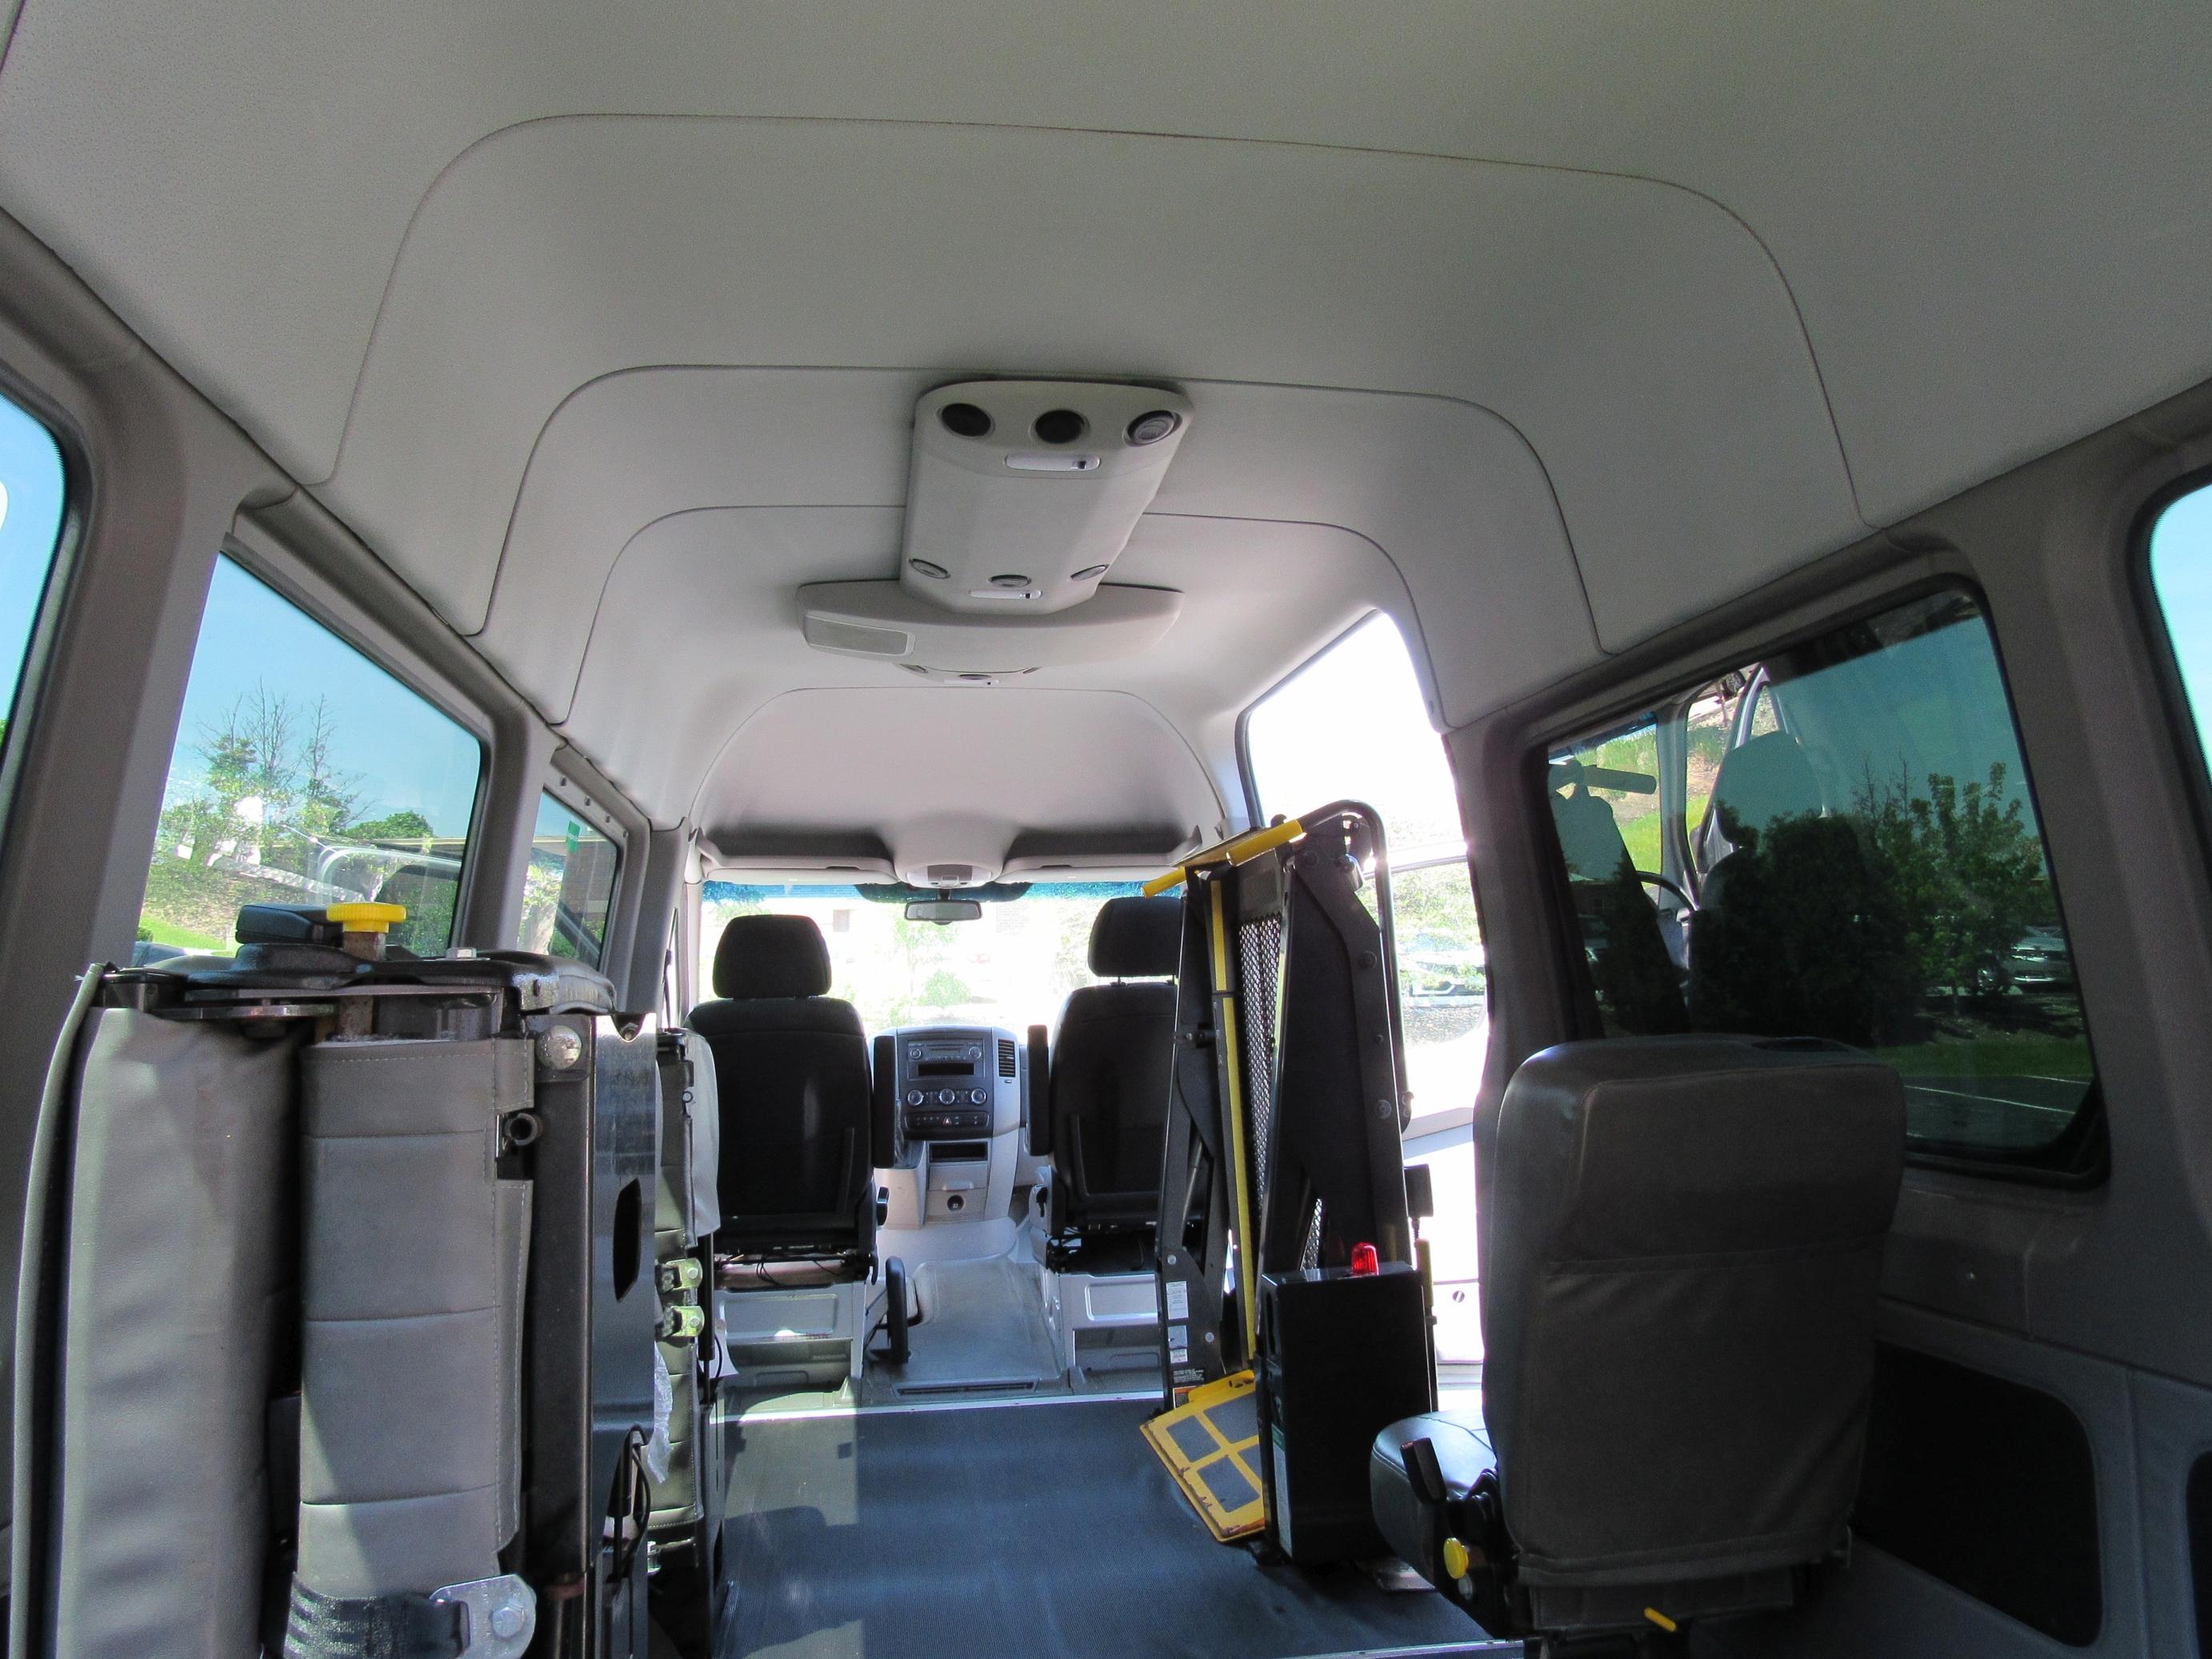 2010 Mercedes Benz Sprinter van, 2500 equipped with handicap lift, with fold up seats